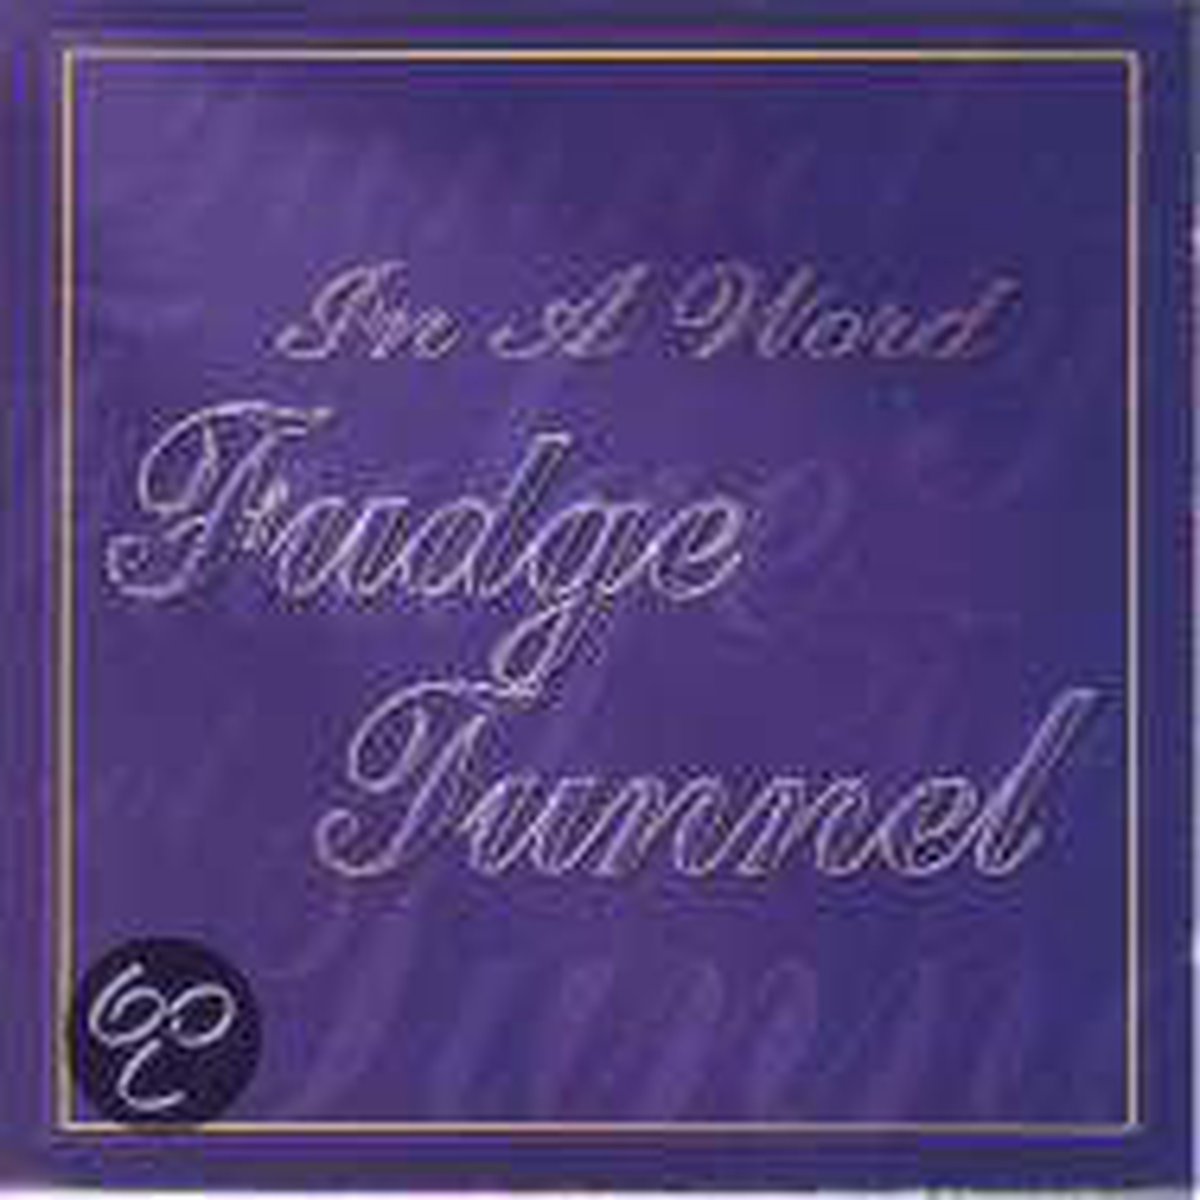 In A Word - Fudge Tunnel